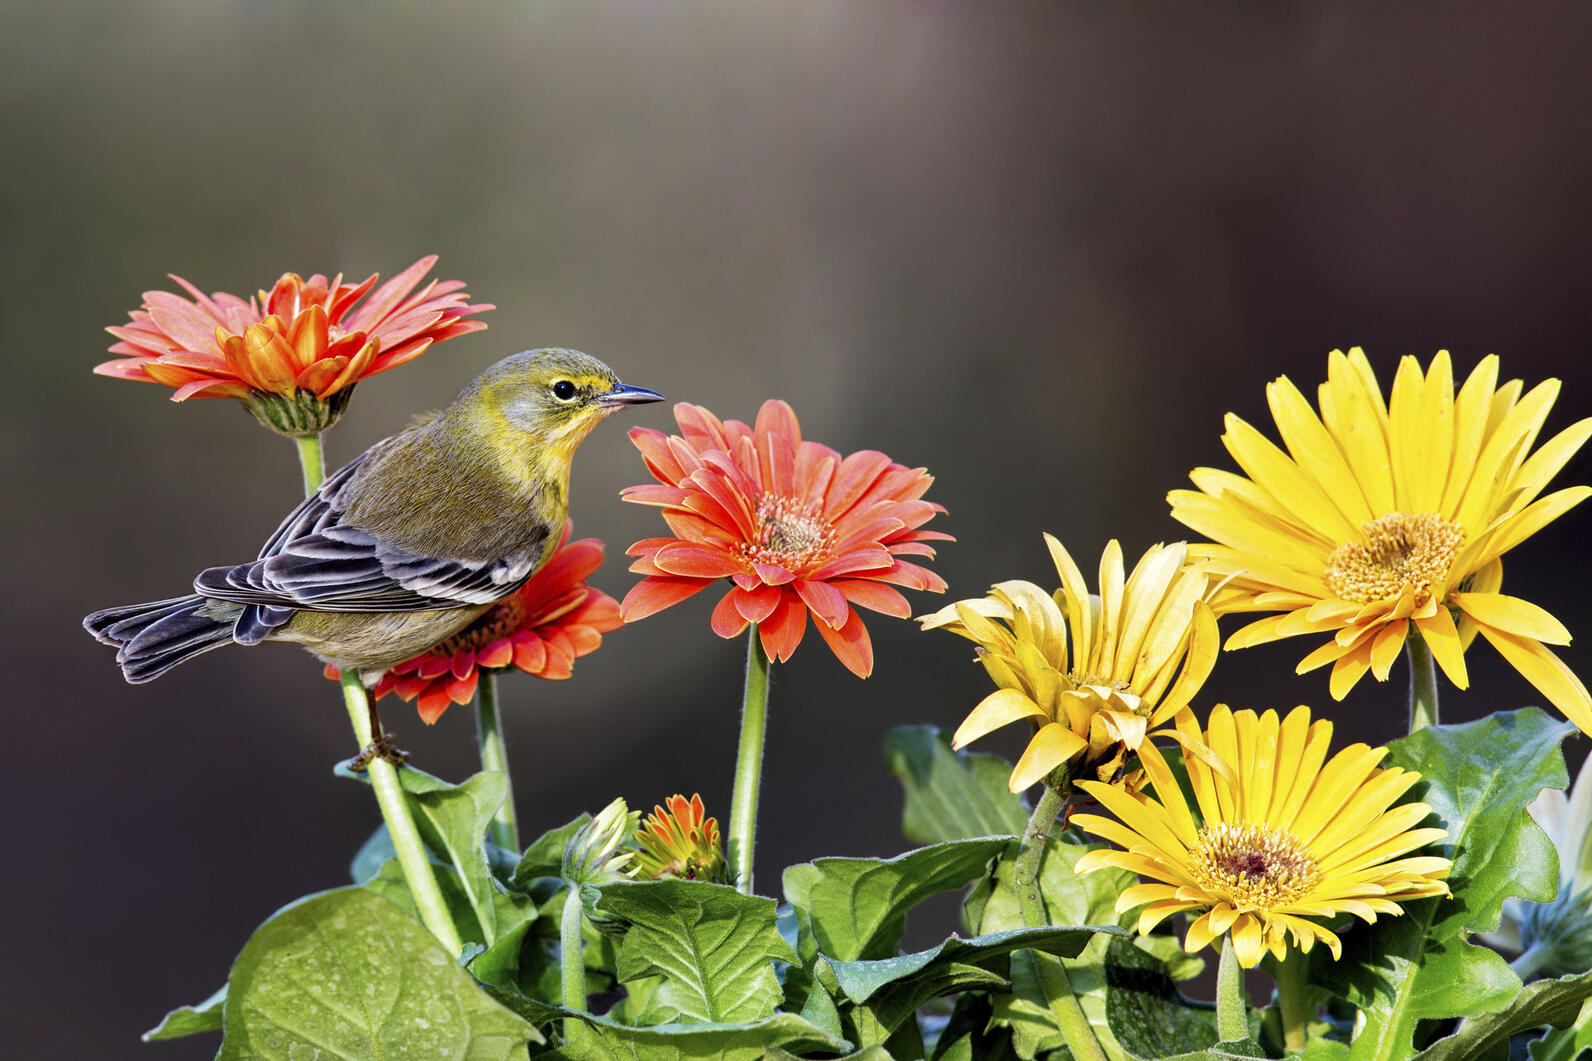 A pine warbler sitting on some wildflowers in the foreground. Background is blurred.